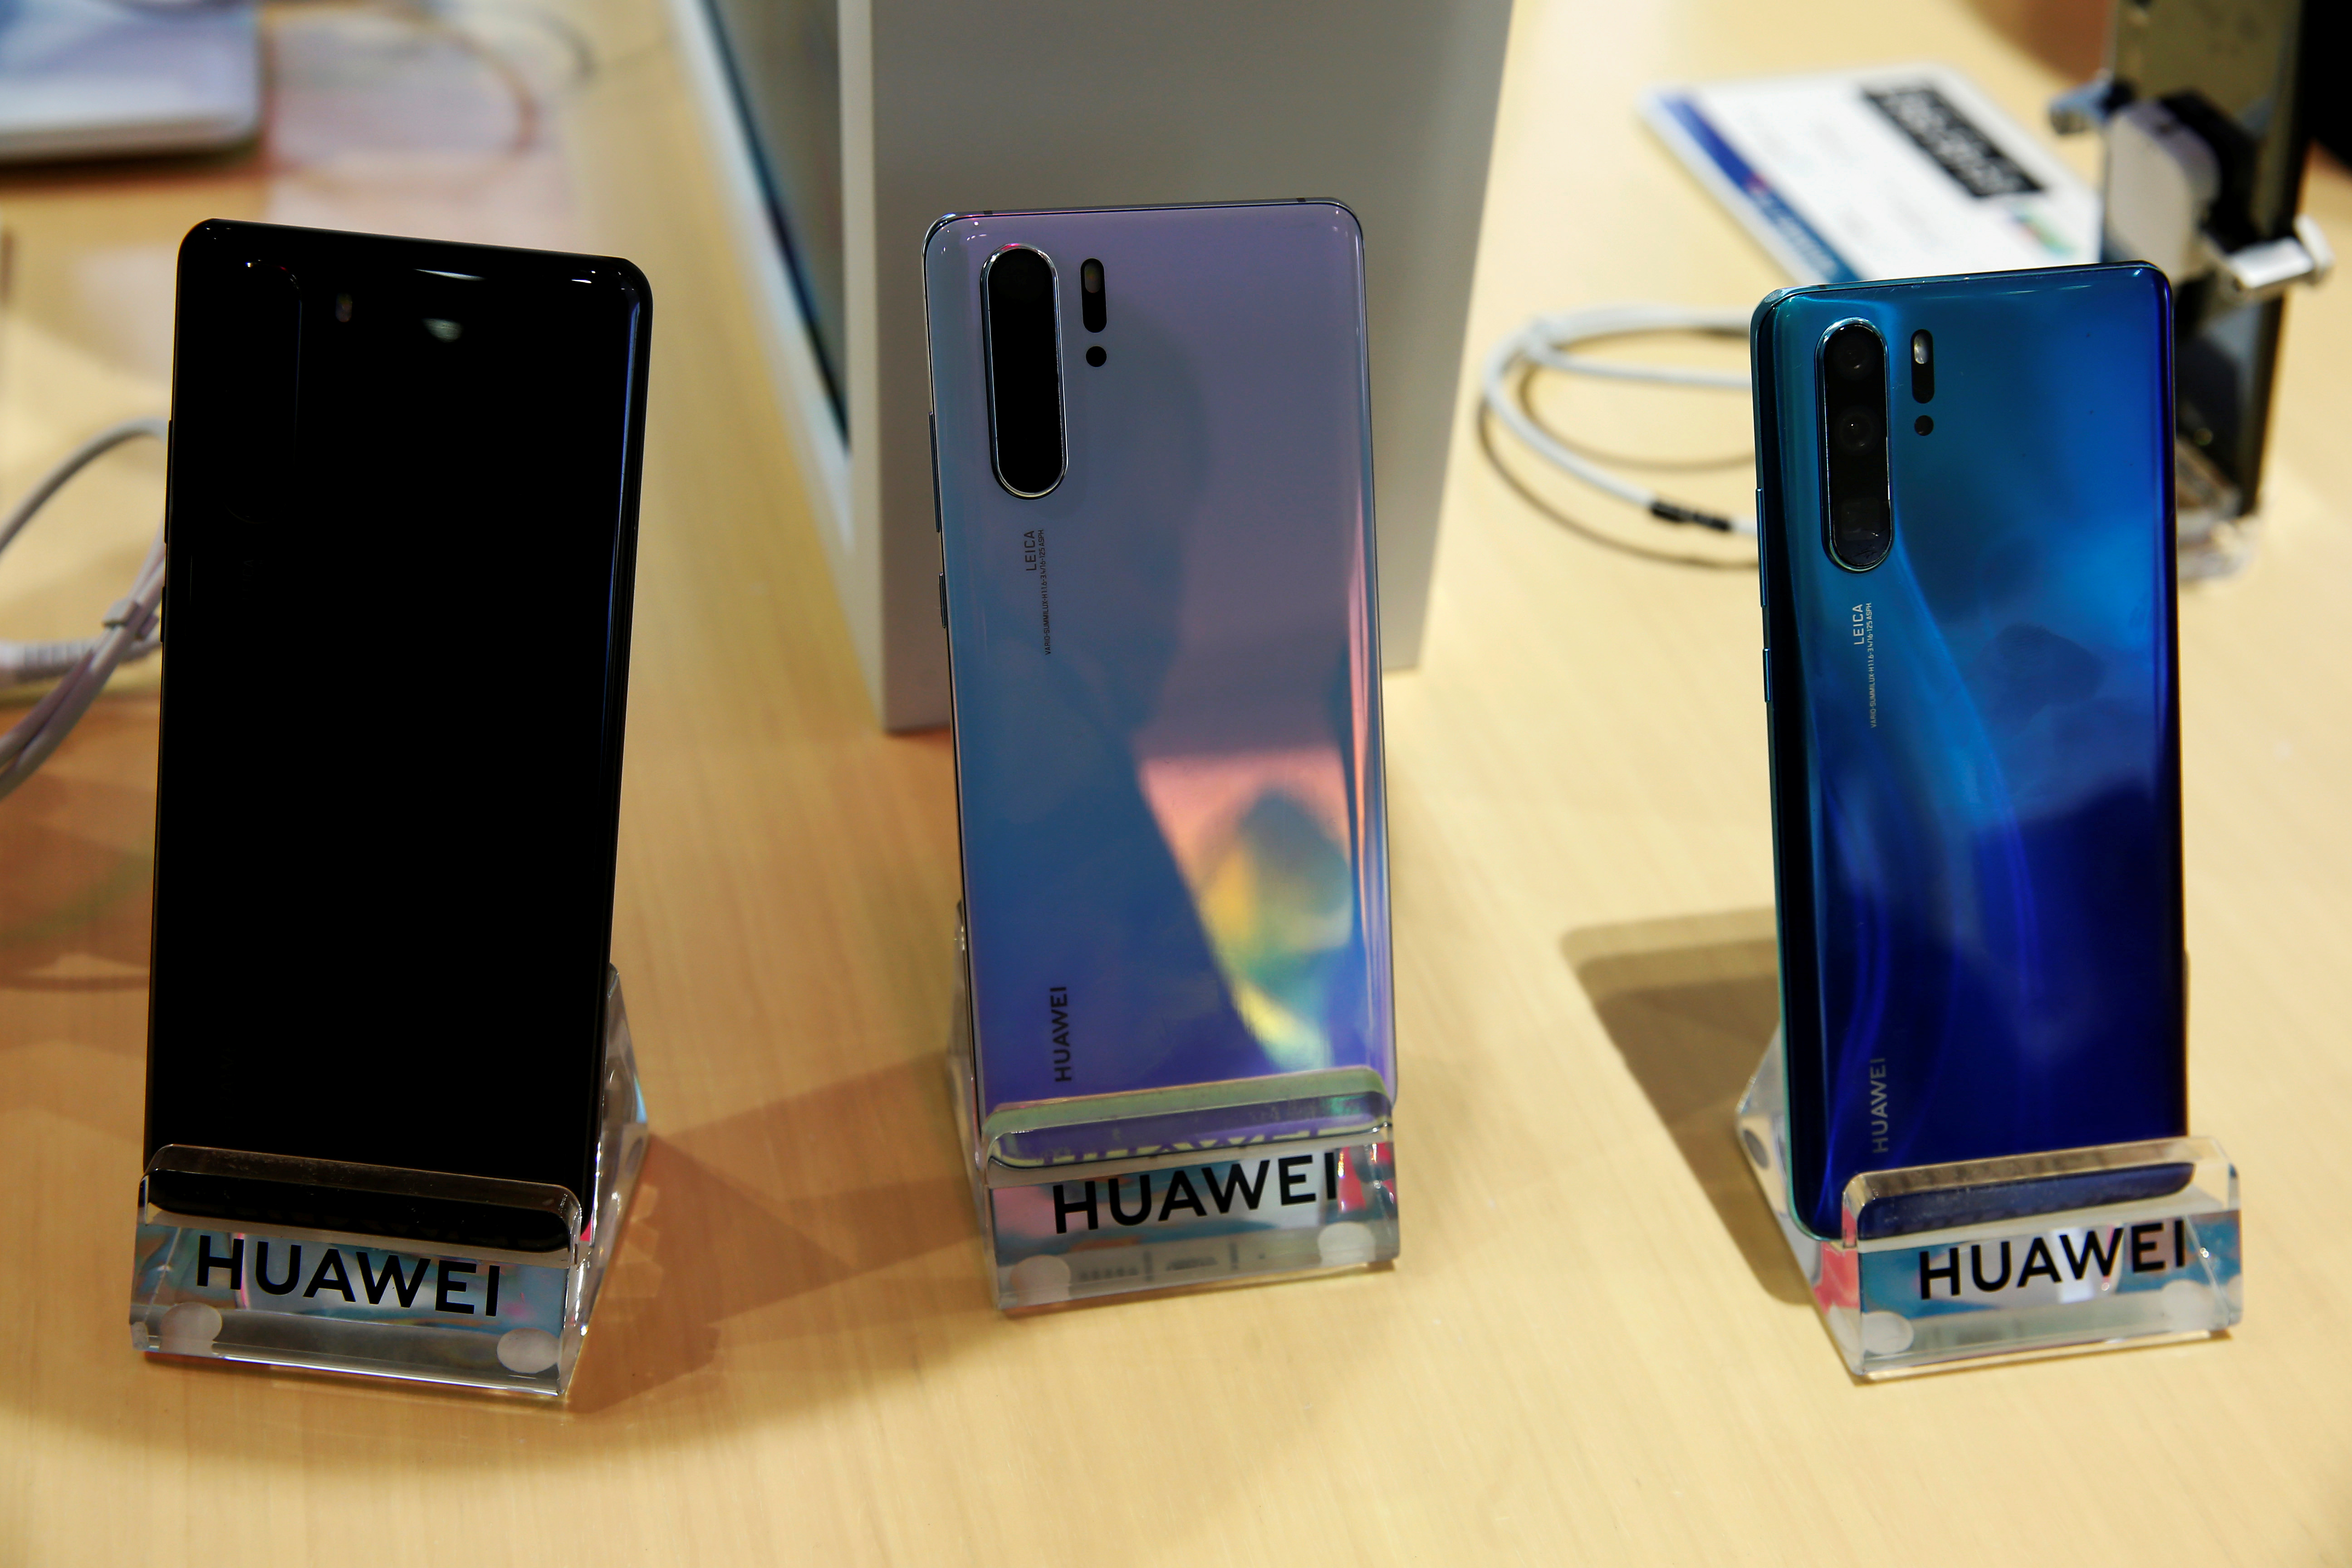 Huawei's China smartphone sales surge in Q3 as Apple declines